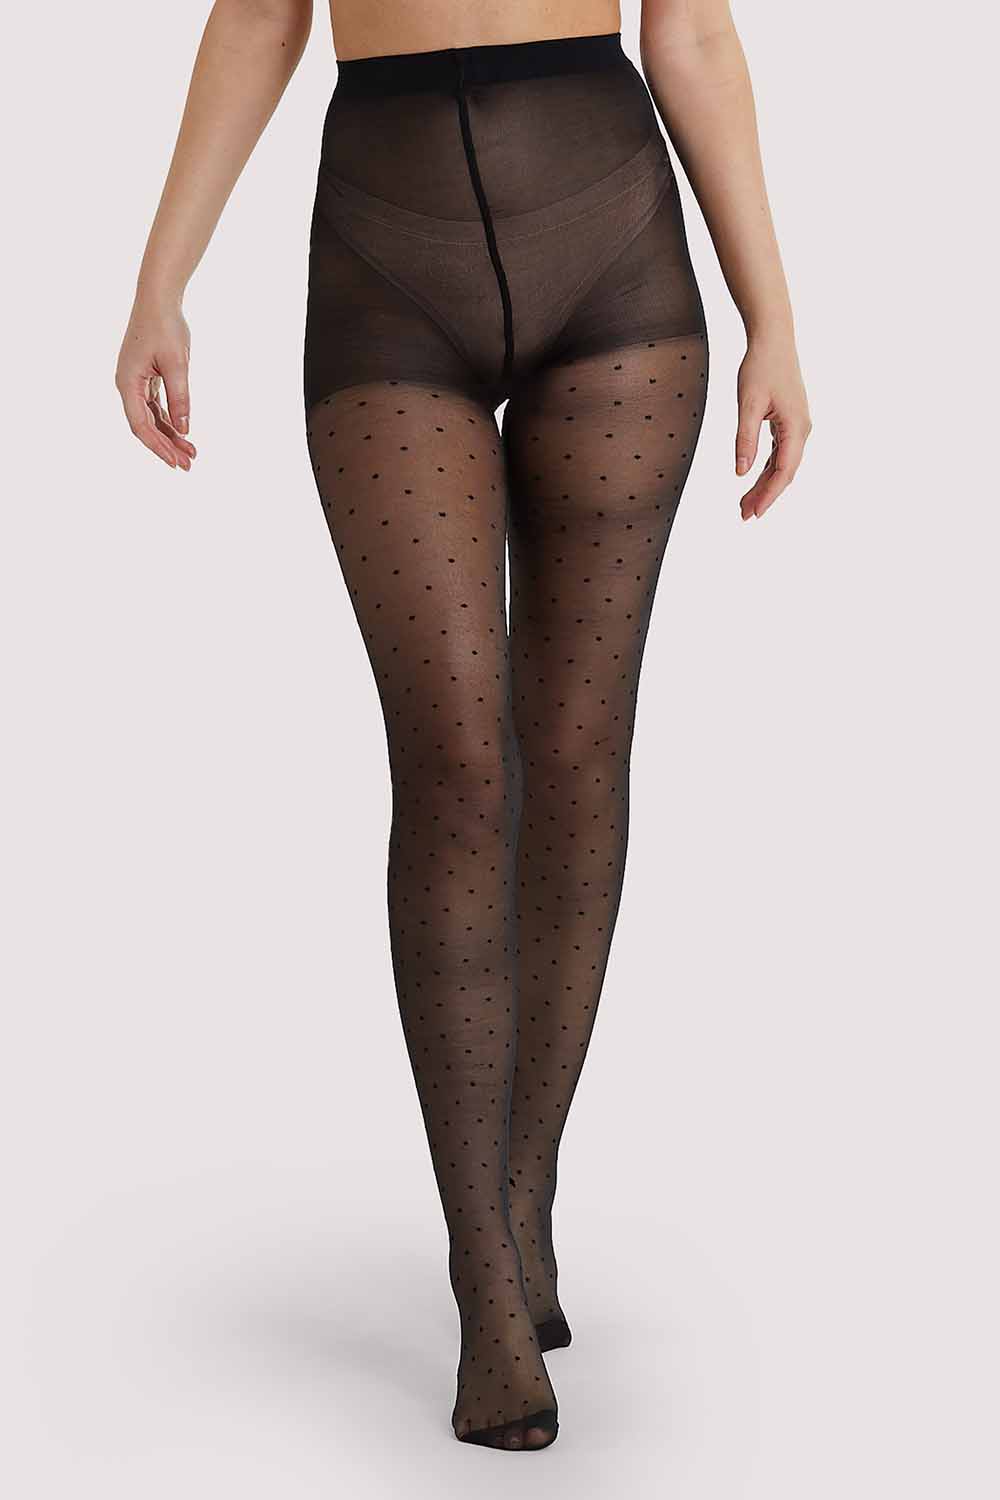 Dotty Seamed Tights With Bow Black – Playful Promises